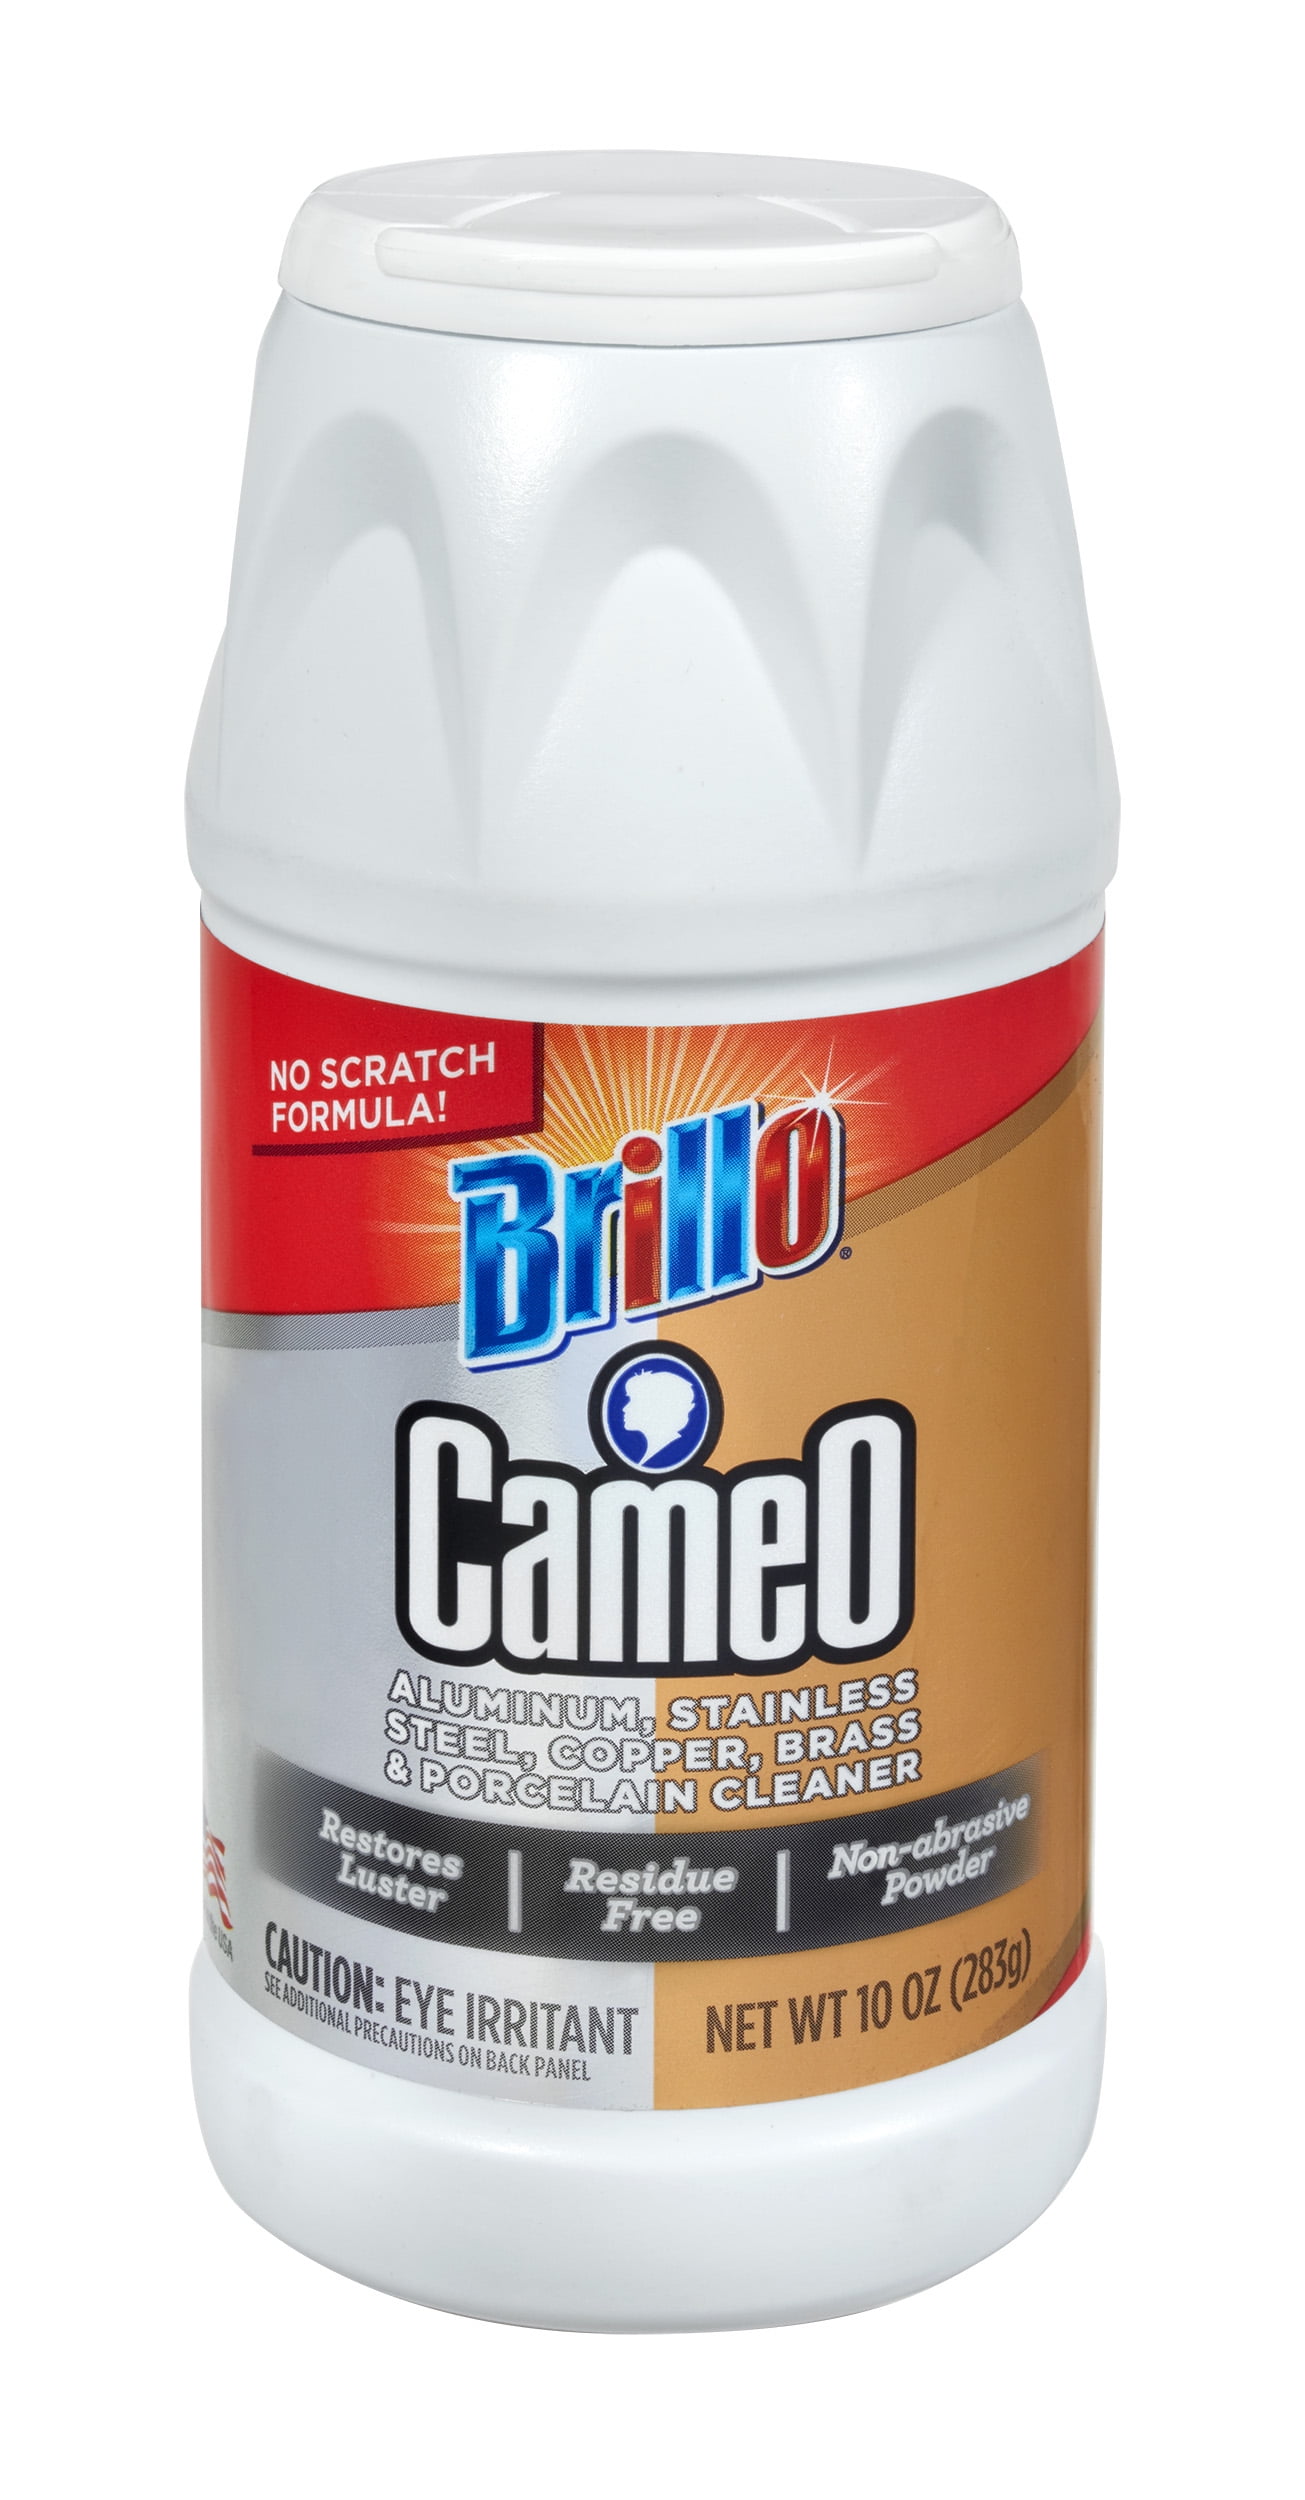 Brillo Cameo Aluminum & Stainless Steel Cleaner, 10 Ounce - Walmart.com Brillo Cameo Aluminum & Stainless Steel Cleaner